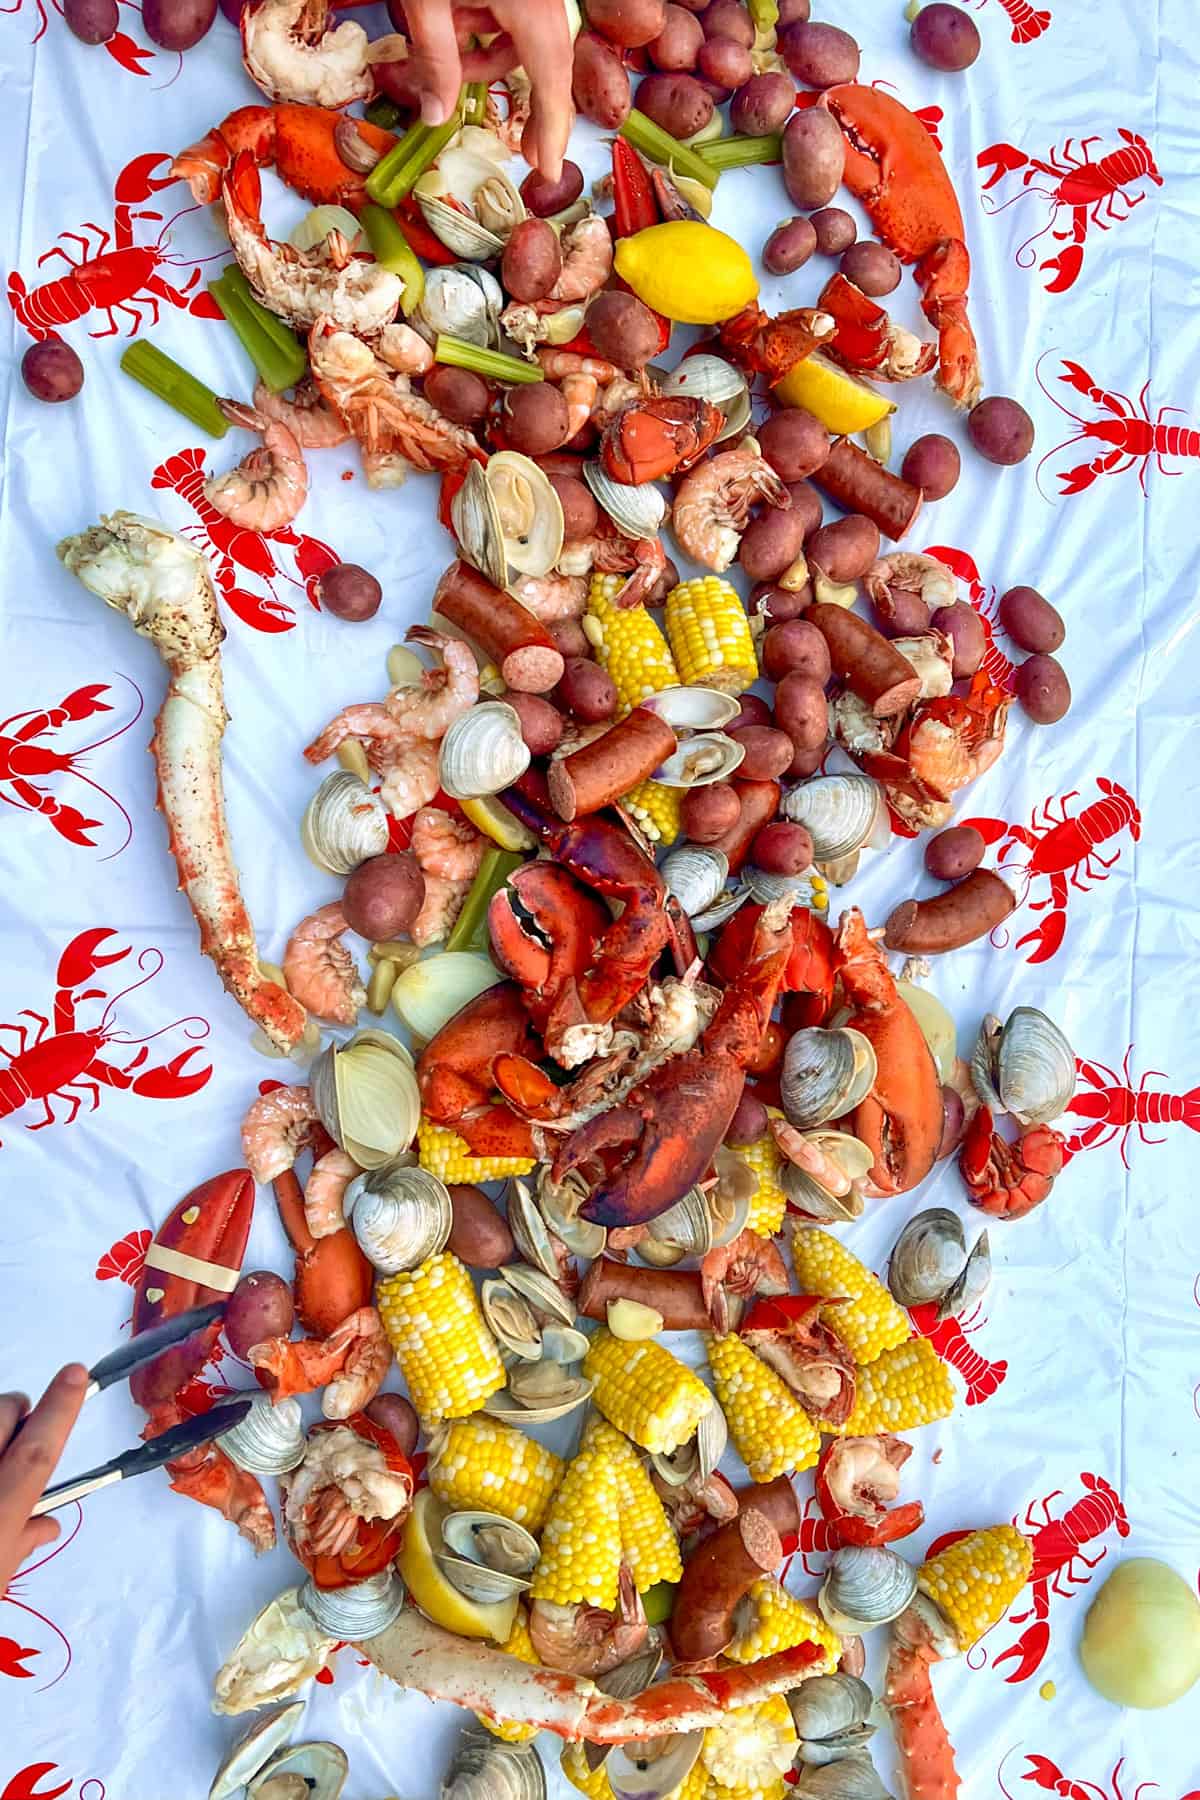 Lots of cooked lobster claws and tails, corn, lemons, clams, crab legs, baby red potatoes, celery, clams and sausages spread out on a table covered with a lobster-printed plastic table cloth.